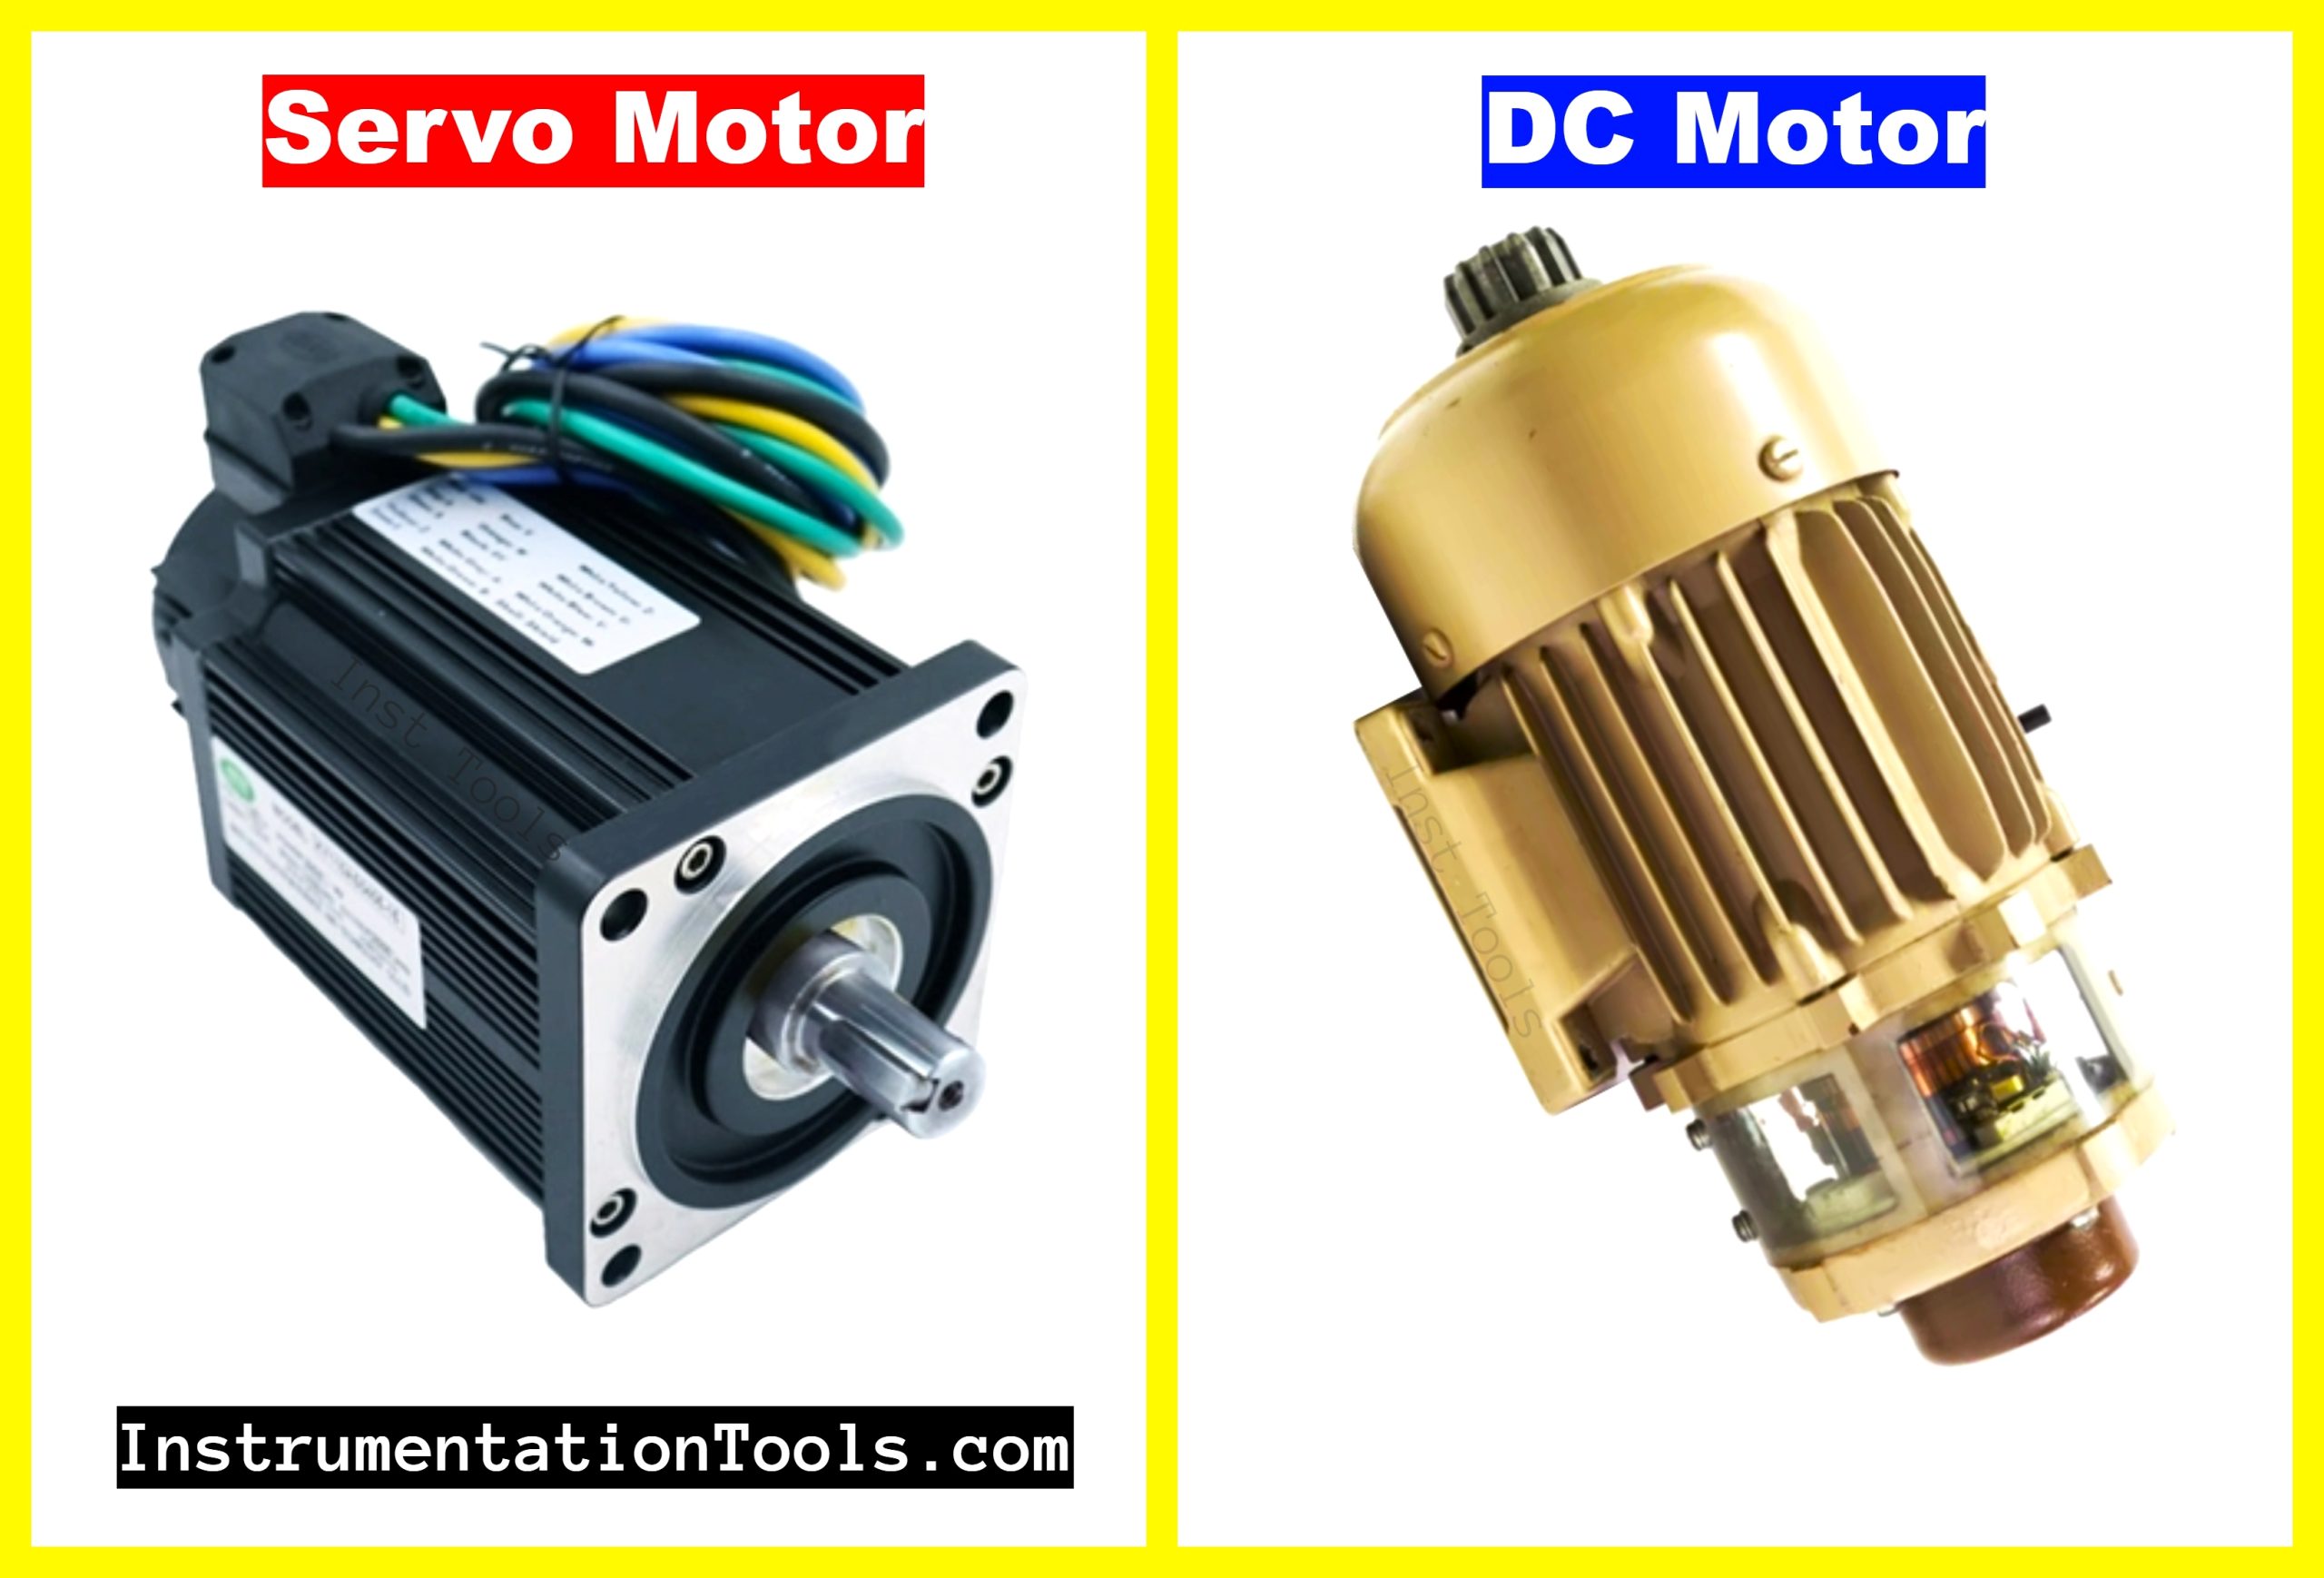 Difference between Servo Motor and DC Motor